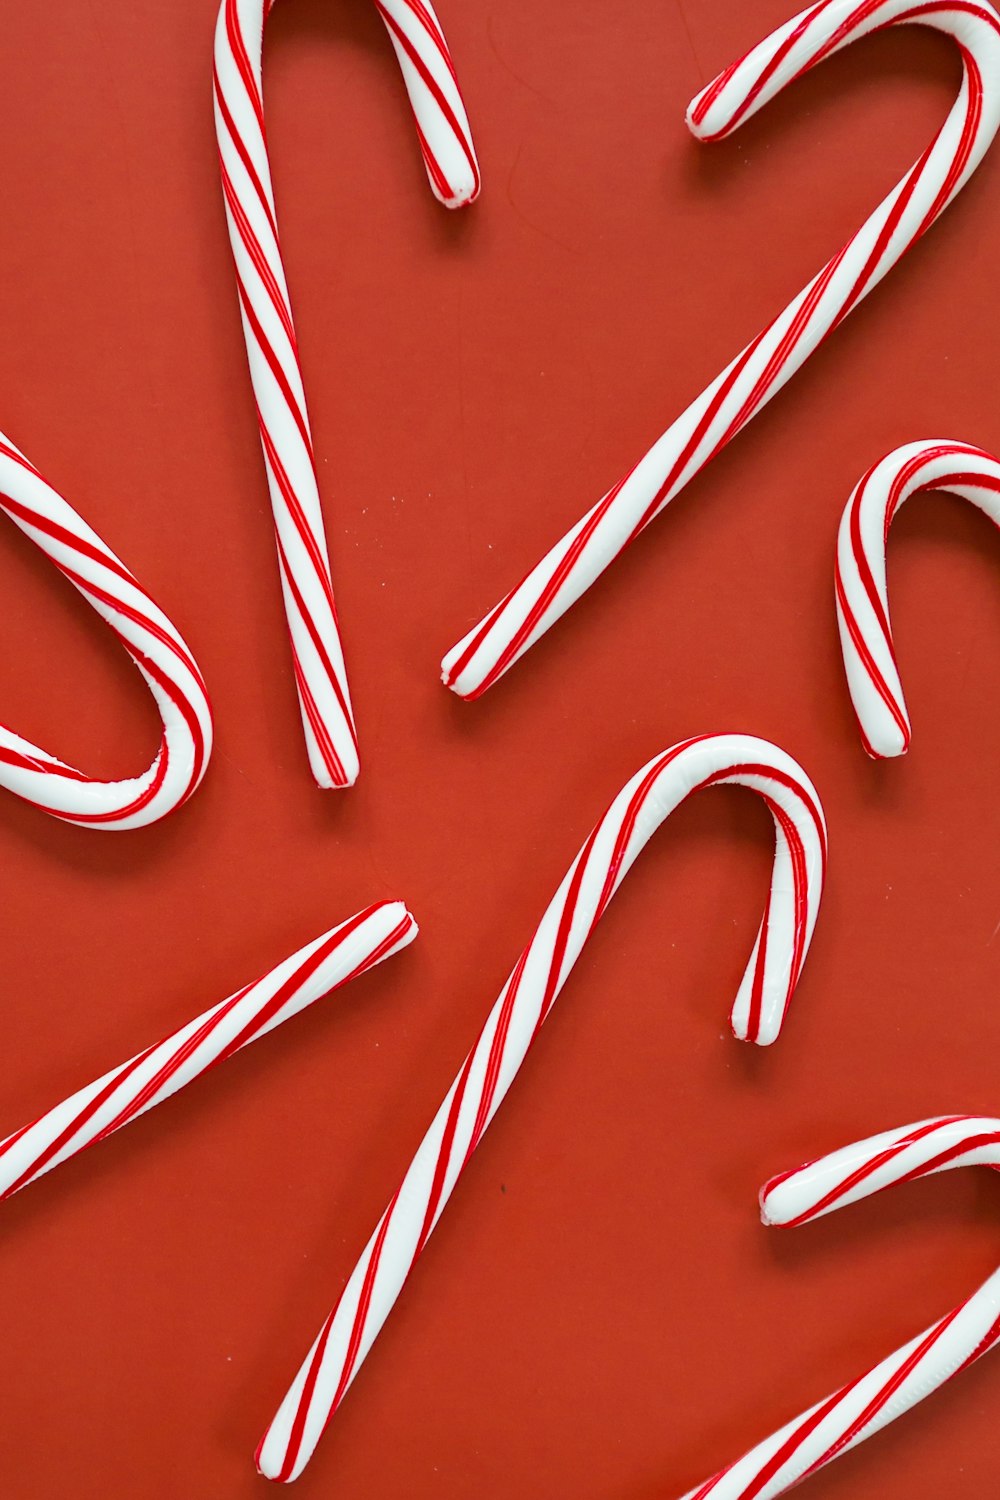 white and red candy canes photo – Free Christmas Image on Unsplash